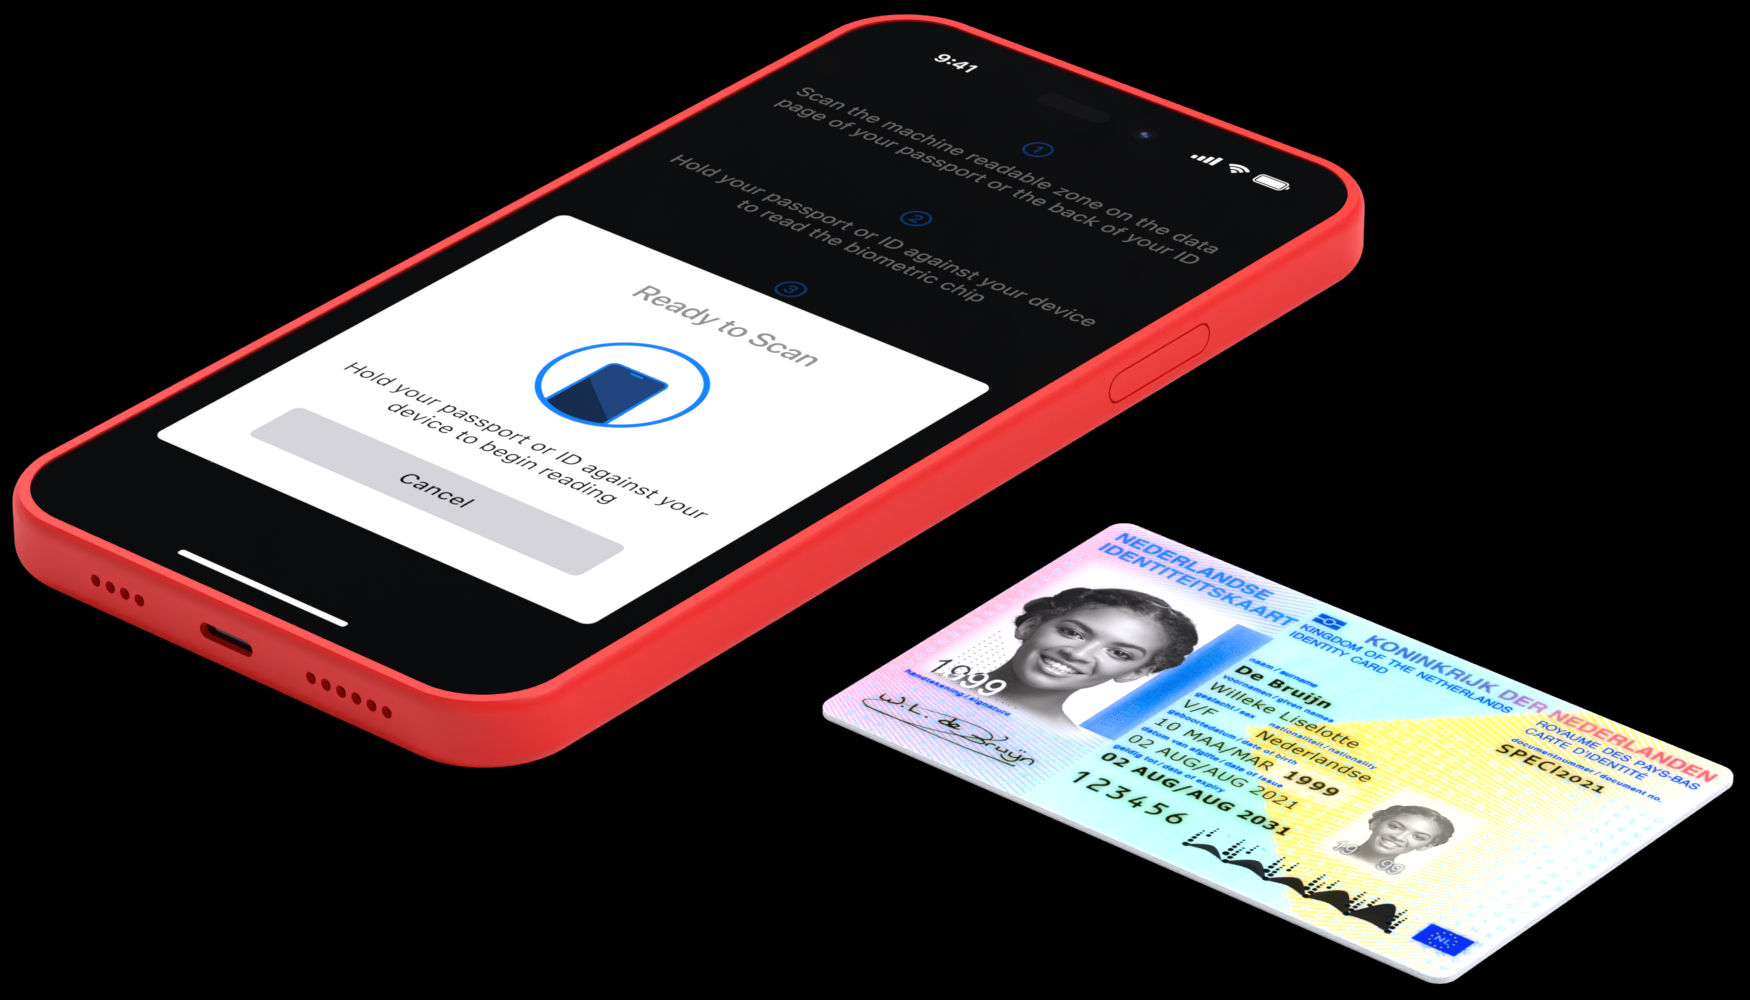 Remote onboarding using NFC and a passport or ID